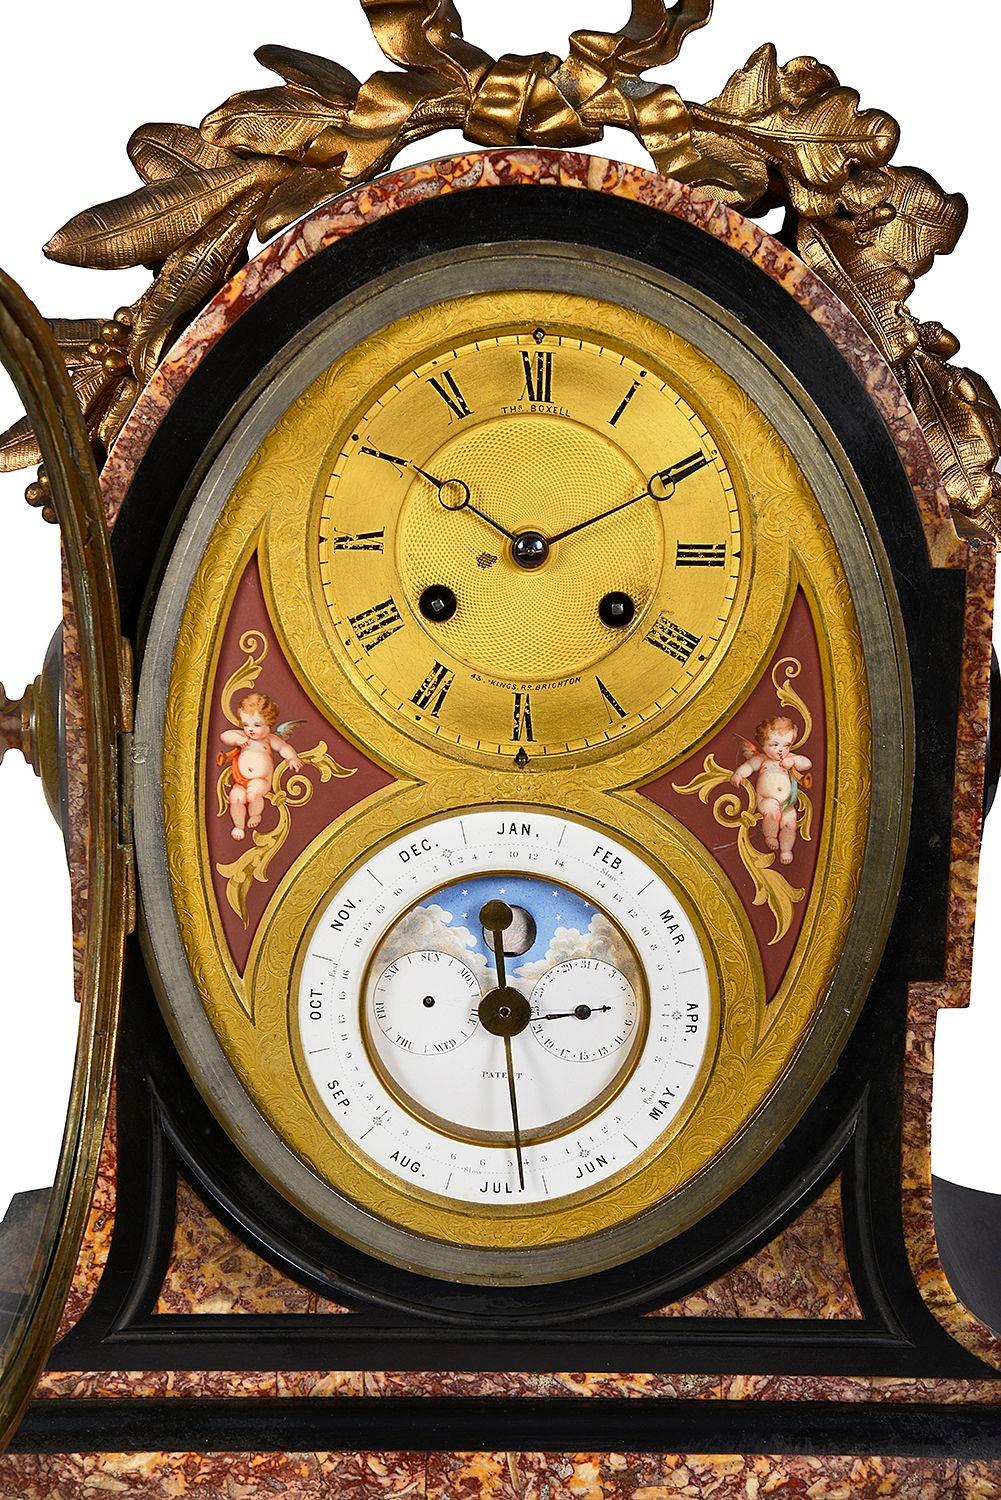 A very good quality 19th Century black and rouge marble mantle clock with calendar. Having a gilded ormolu foliate mount to the top, a gilded clock face with an eight day, hour and half hour striking movement. The white enamel dial beneath with